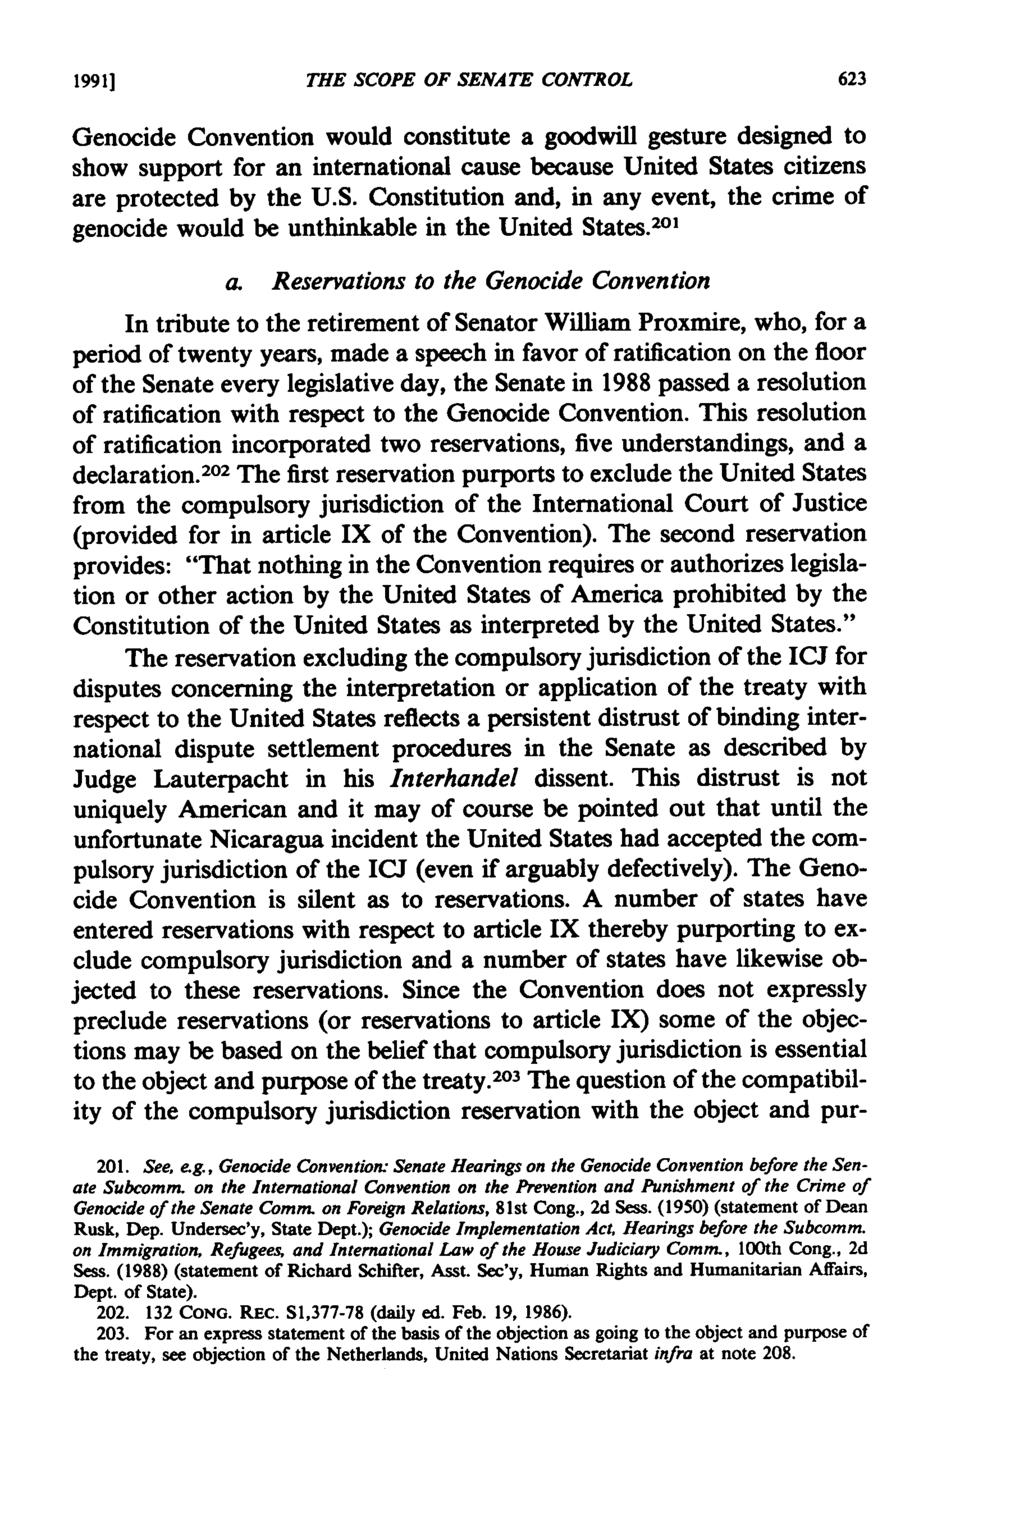 19911 THE SCOPE OF SENATE CONTROL Genocide Convention would constitute a goodwill gesture designed to show support for an international cause because United States citizens are protected by the U.S. Constitution and, in any event, the crime of genocide would be unthinkable in the United States.